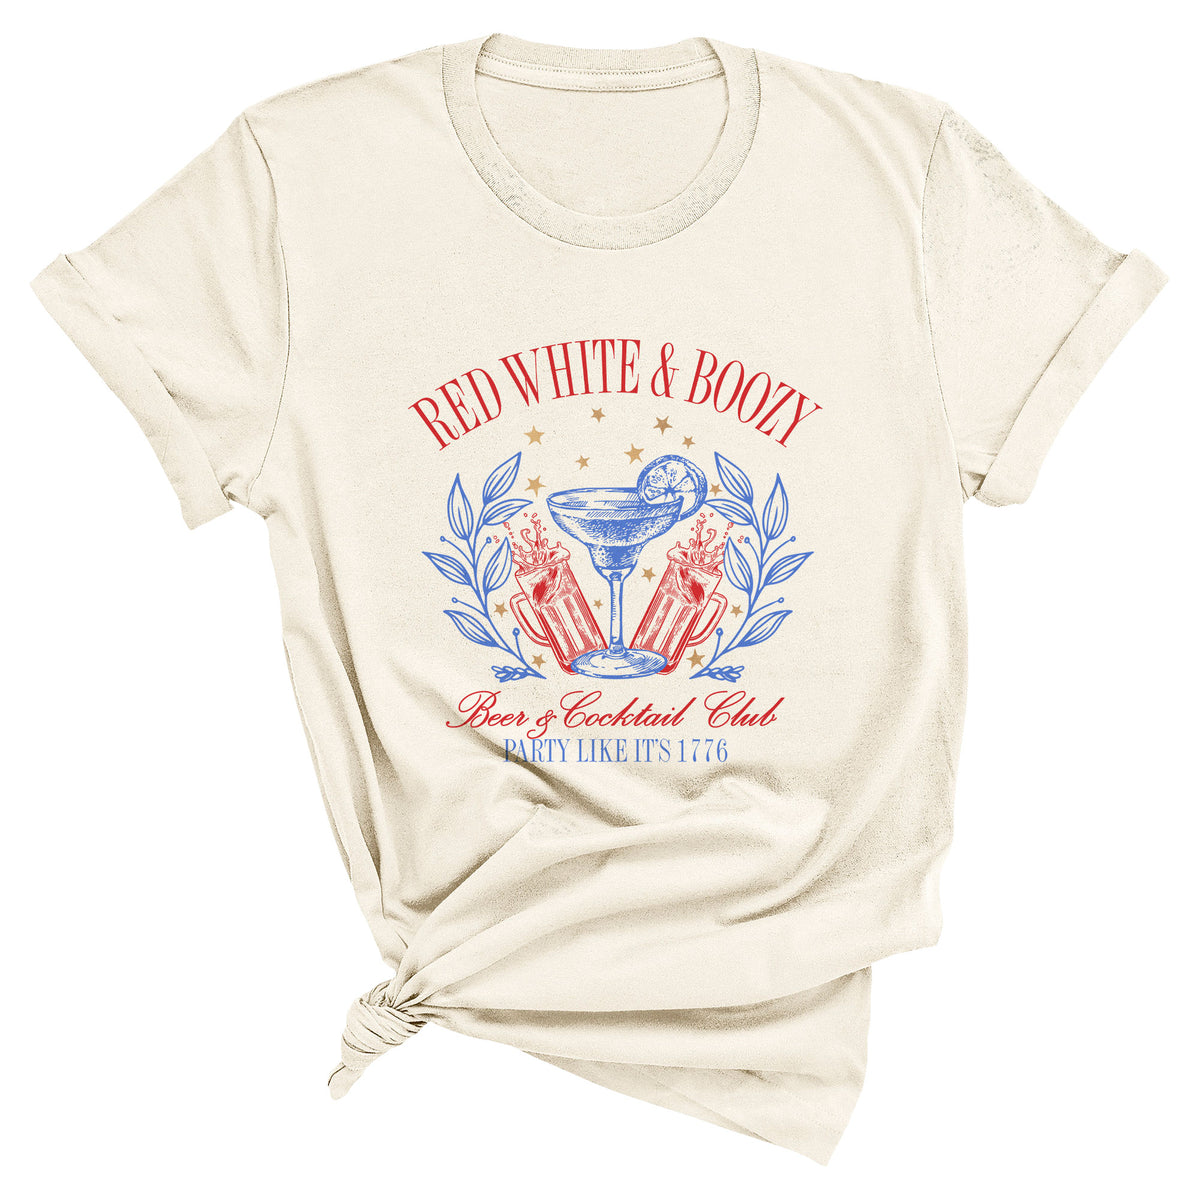 Red White & Boozy, Beer & Cocktail Club Comfort Colors T-Shirt